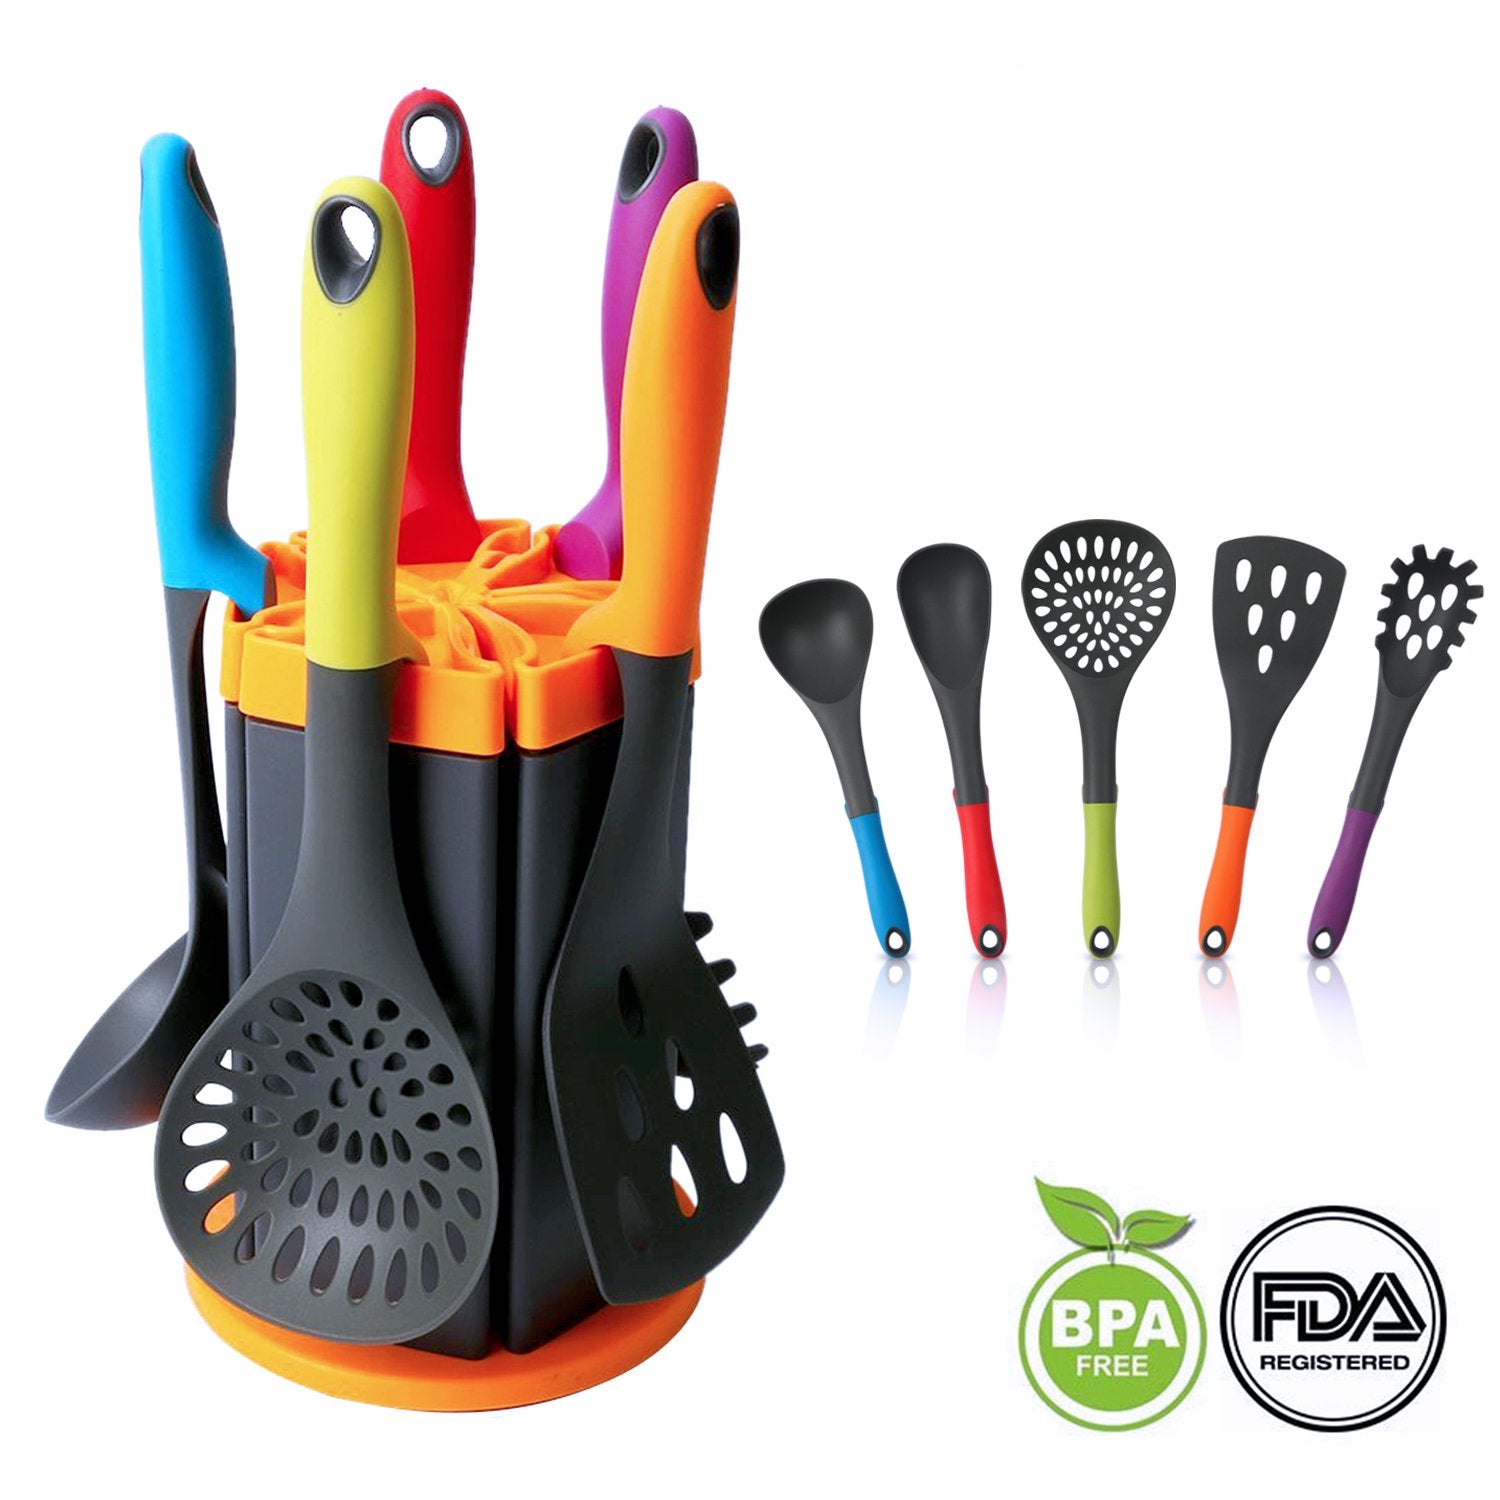 Nylon Kitchen Utensils, MCIRCO 11-piece Silicone Cooking Utensil Set Durable Heat-resistant Non-stick with Non-skid Rotating Stand Attractive Rotating Holder (6 pack)